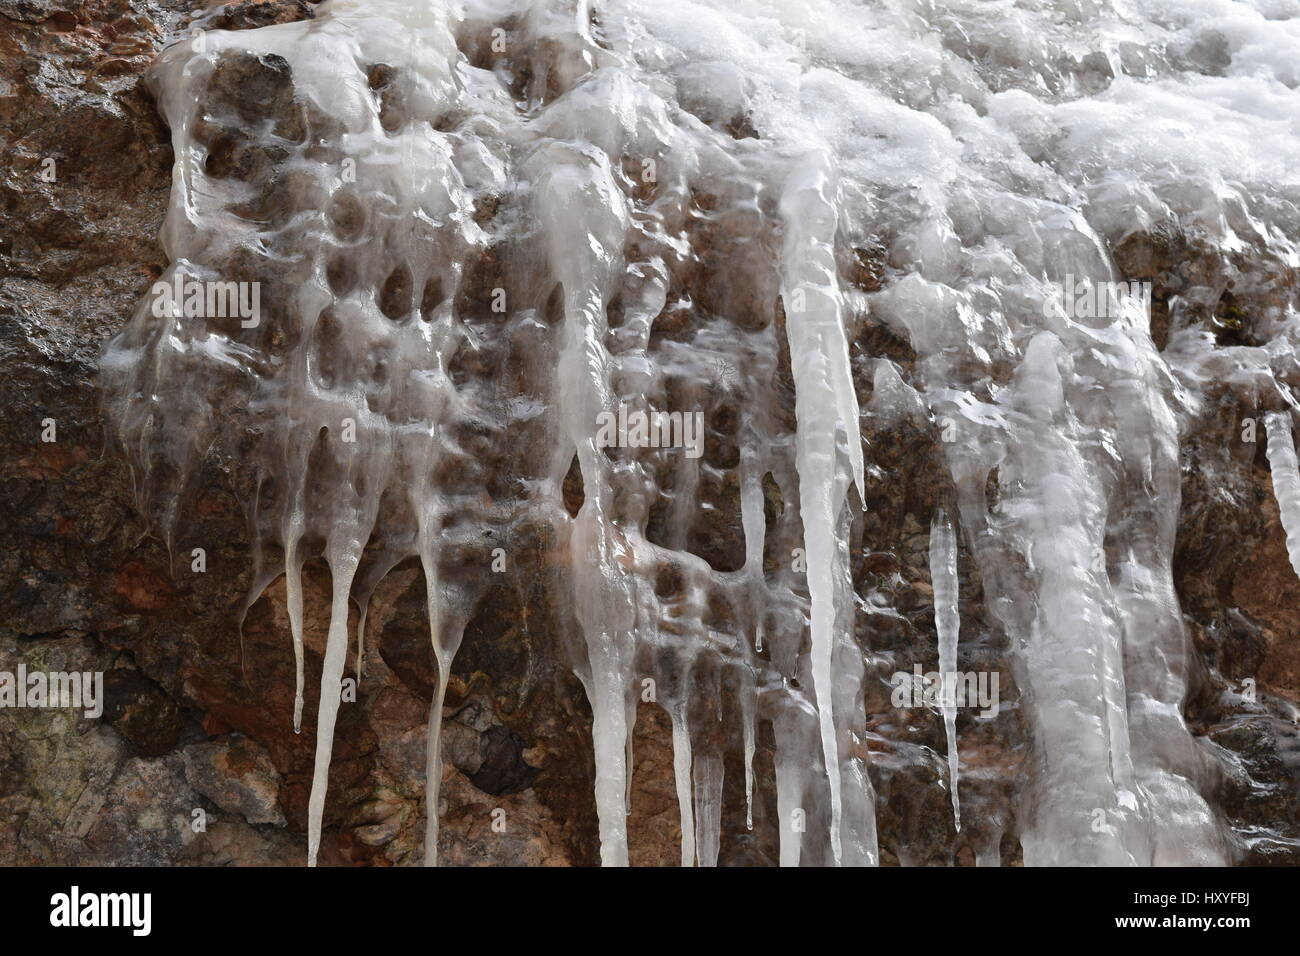 Icy sulle rocce Foto Stock